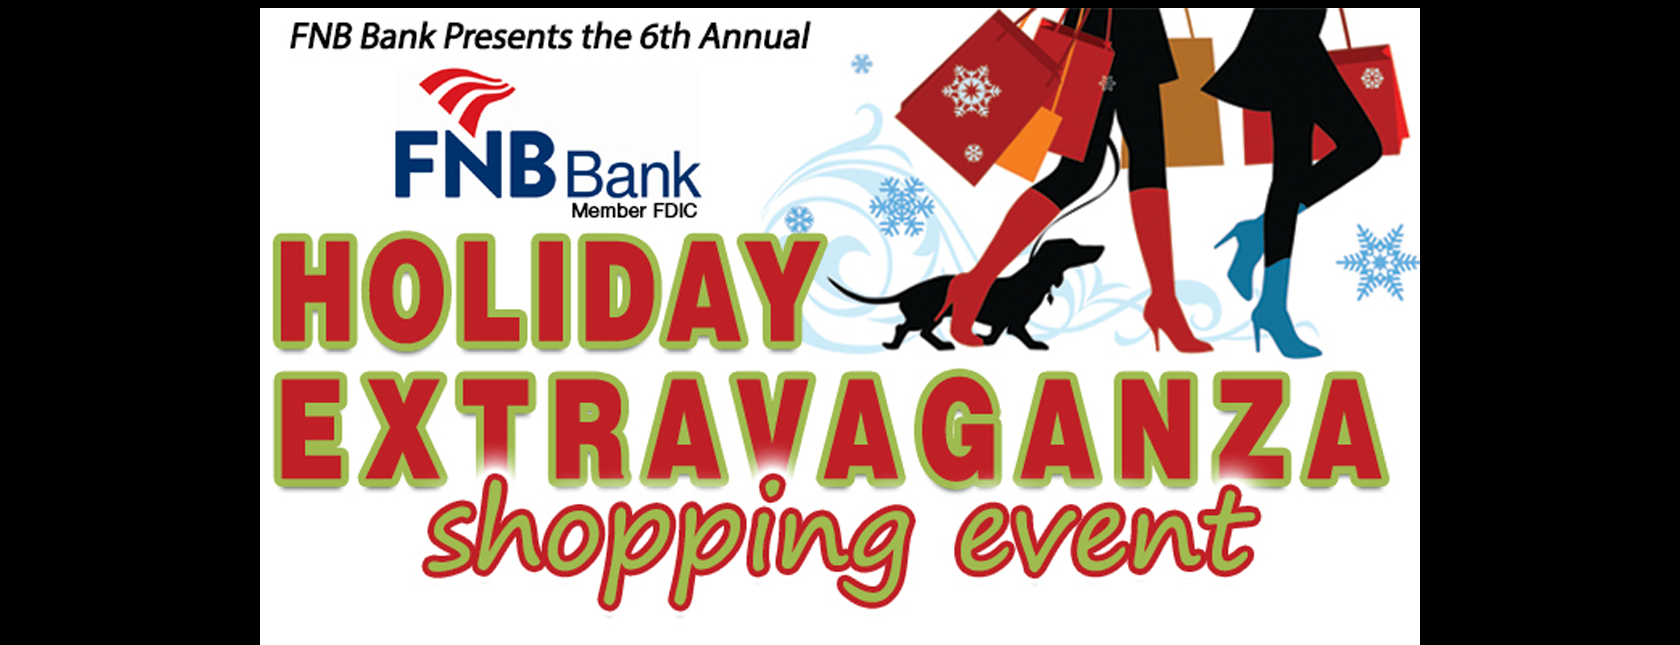 FNB Presents the 6th Annual Holiday Shopping Extravaganza